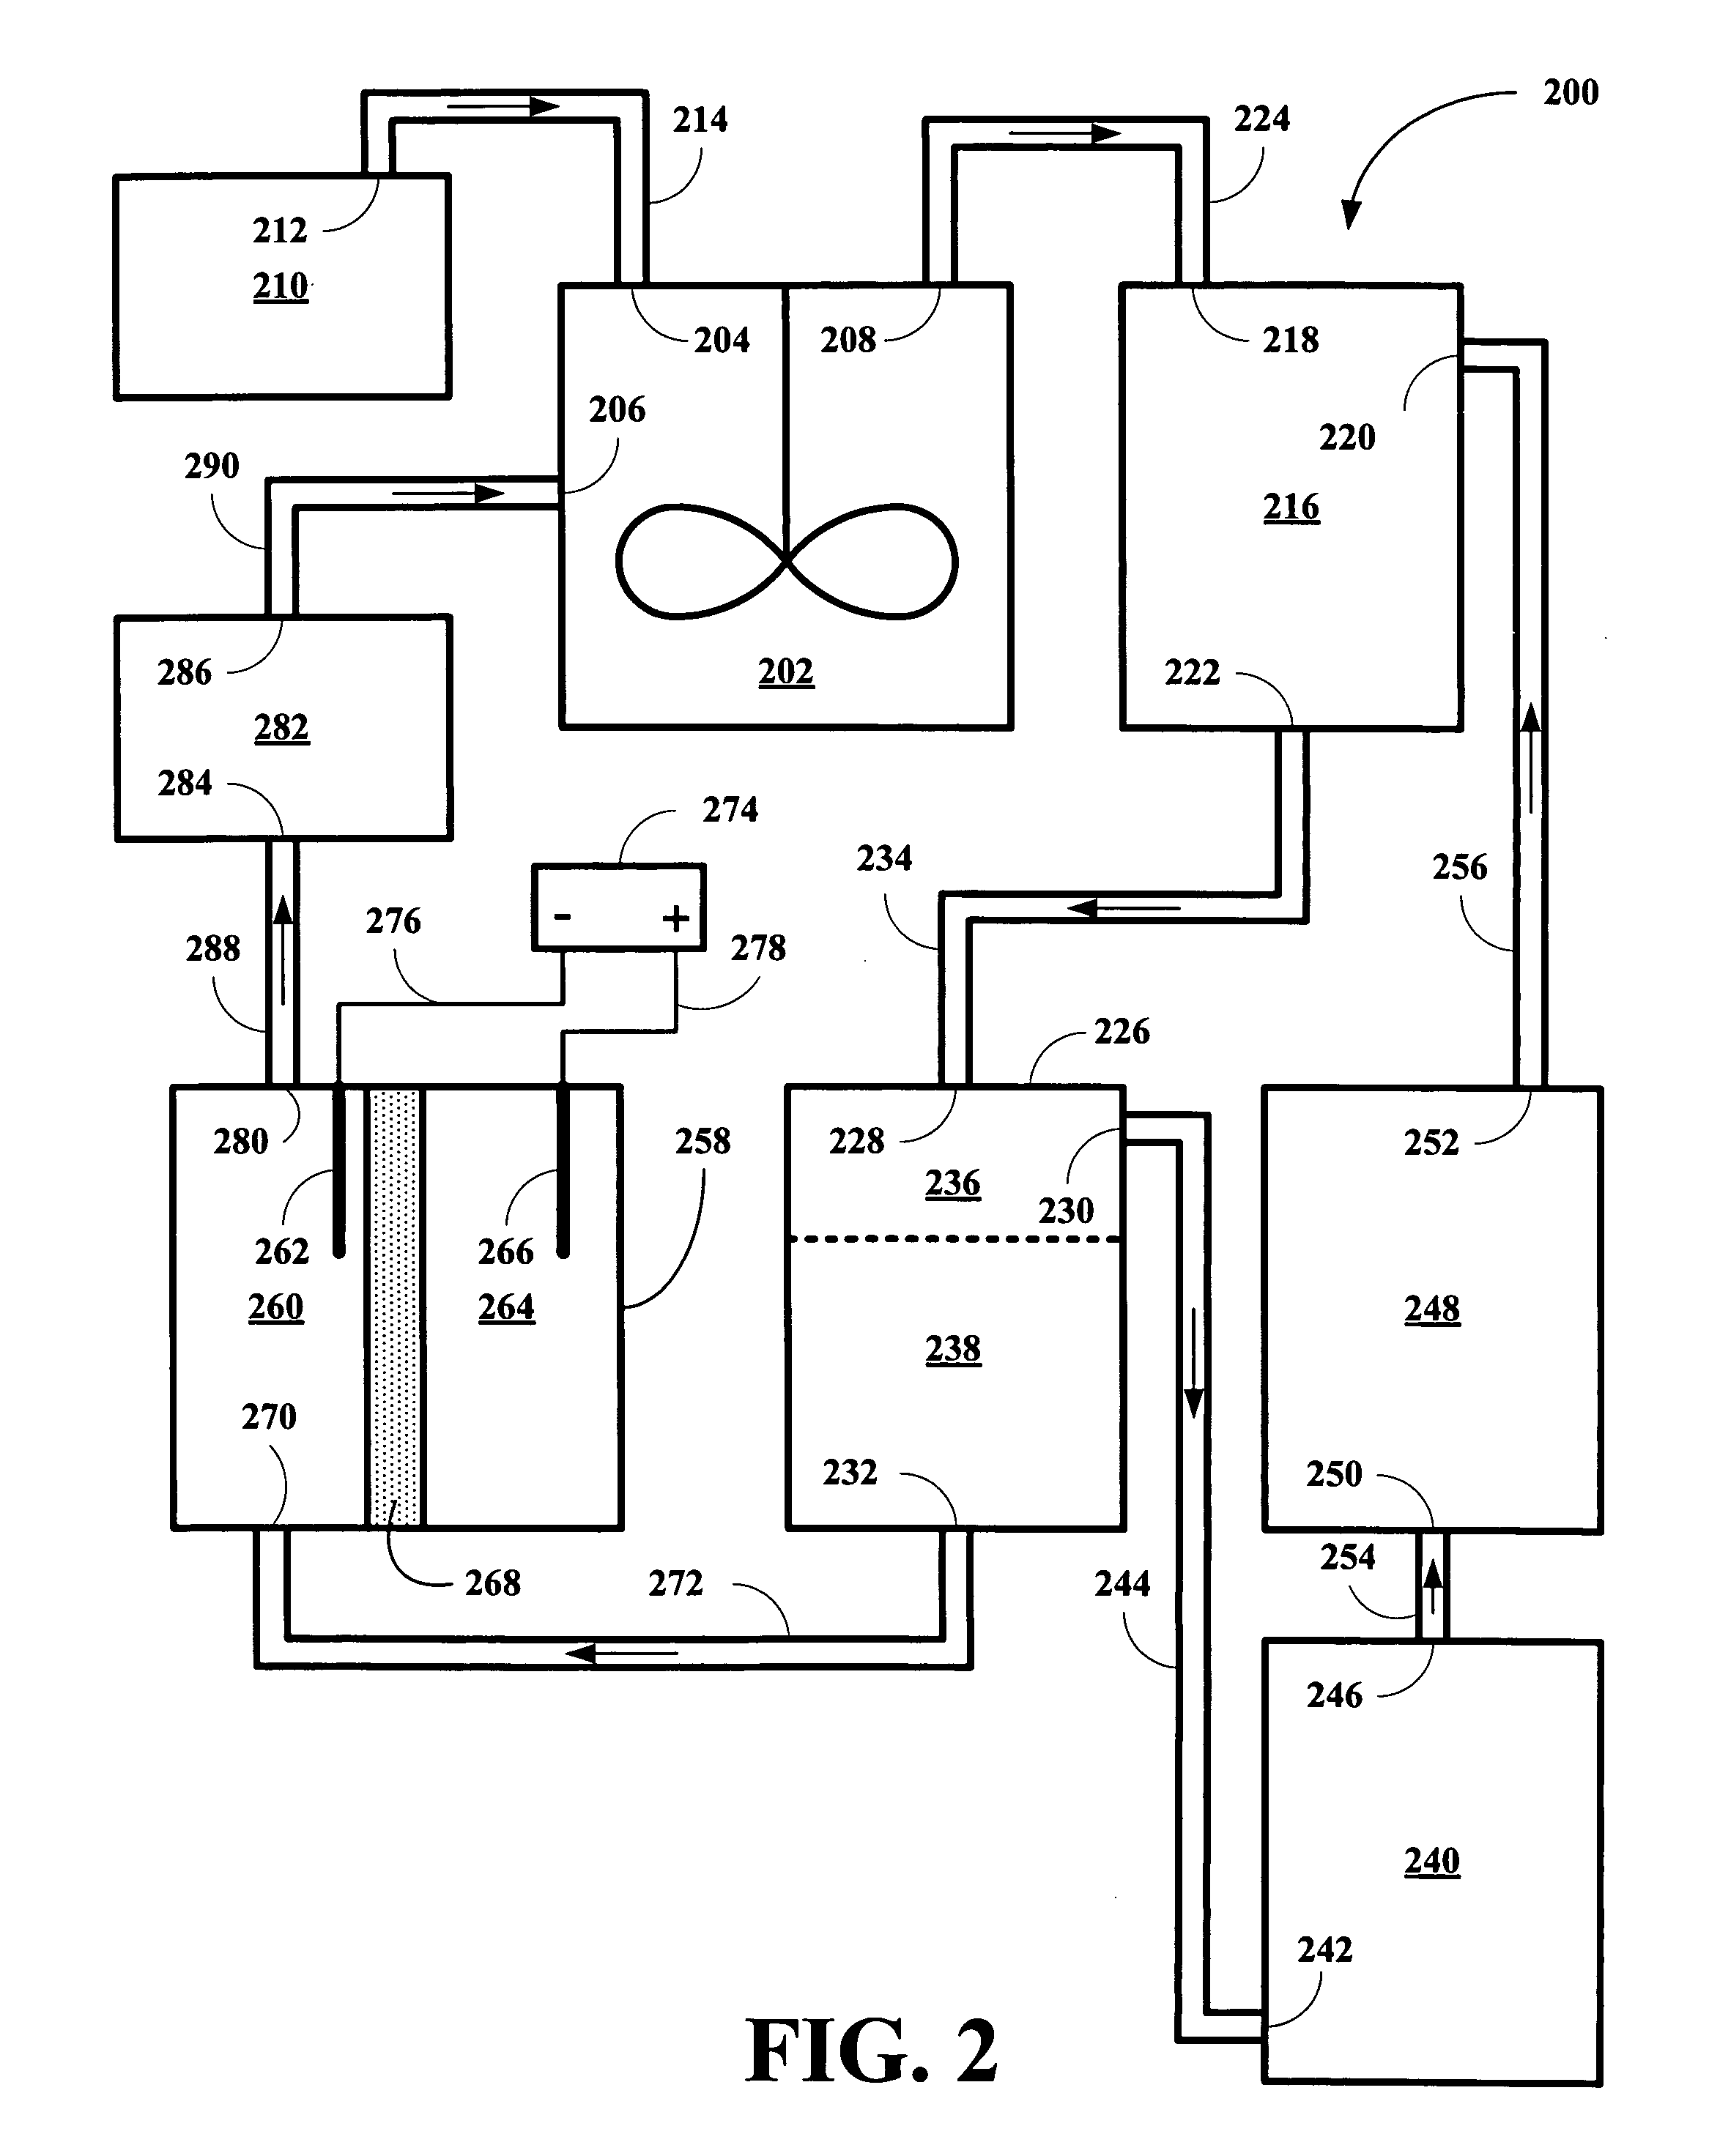 Coupled electrochemical method for reduction of polyols to hydrocarbons